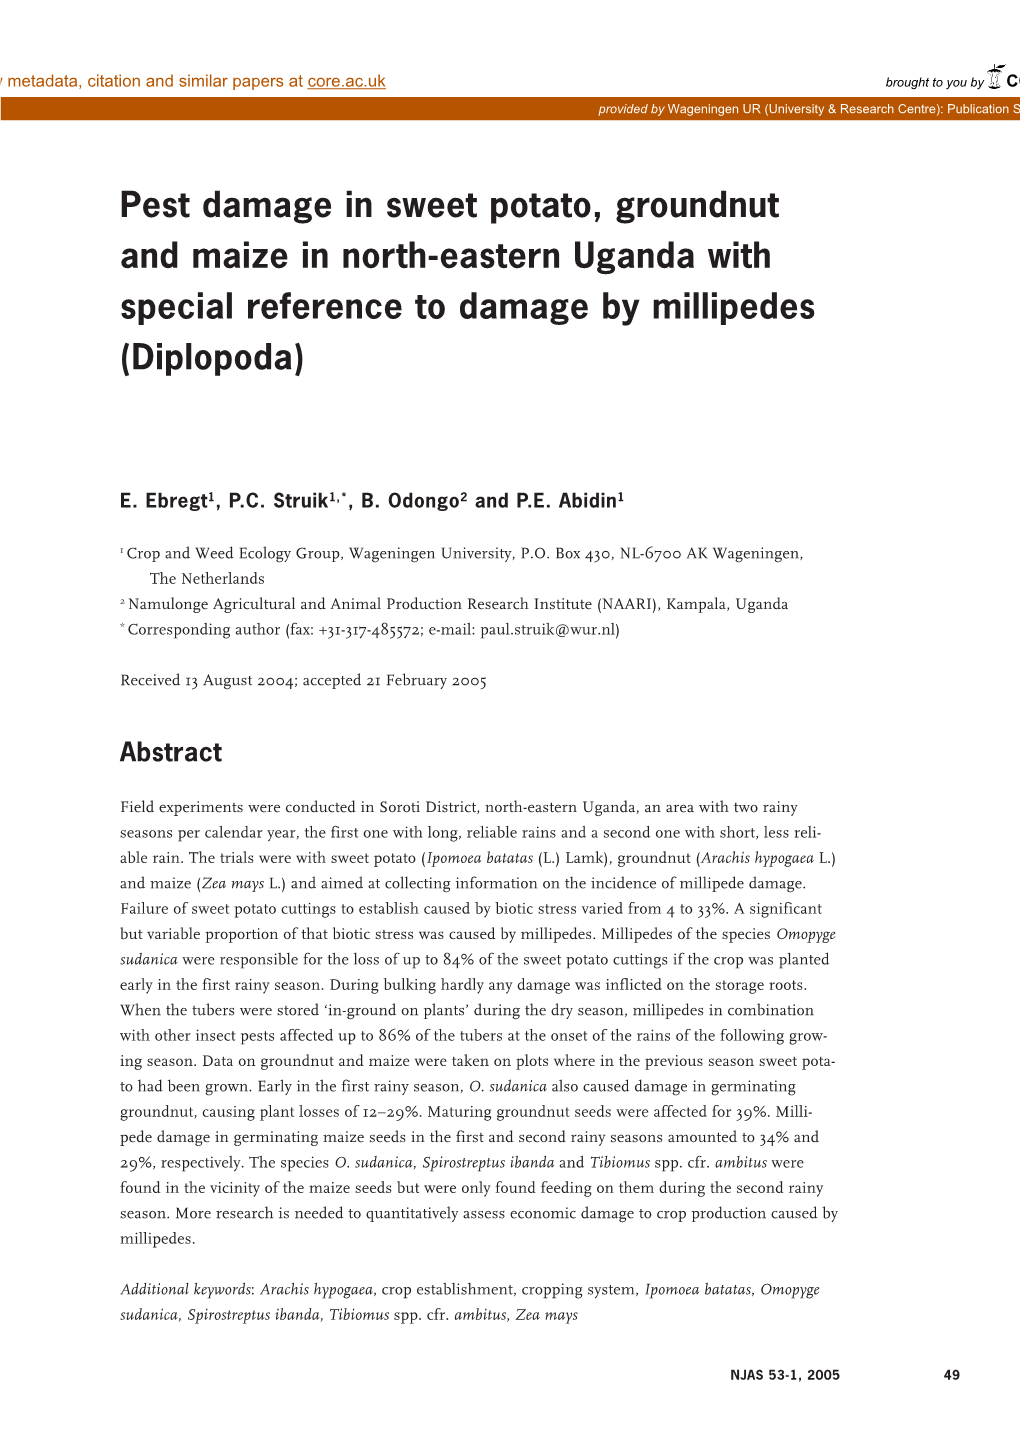 Pest Damage in Sweet Potato, Groundnut and Maize in North-Eastern Uganda with Special Reference to Damage by Millipedes (Diplopoda)